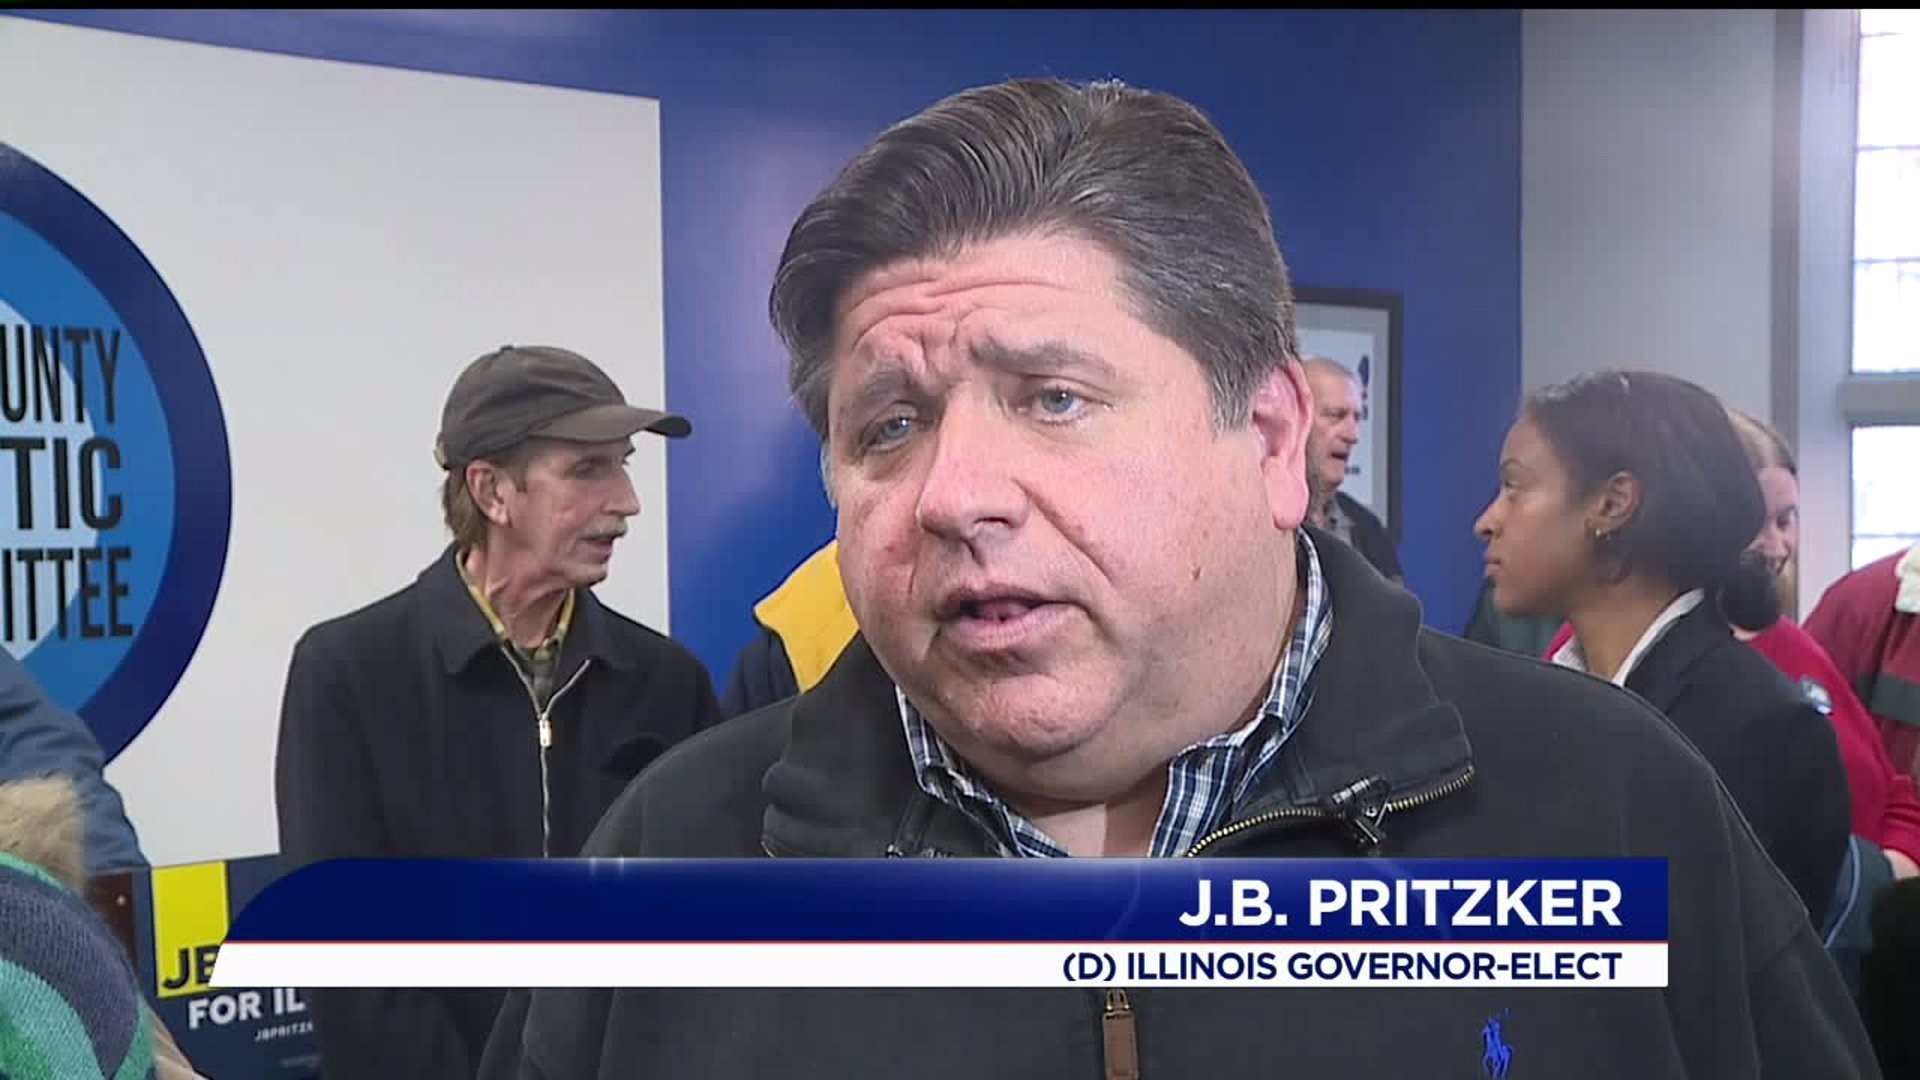 Pritzker Comes To Town